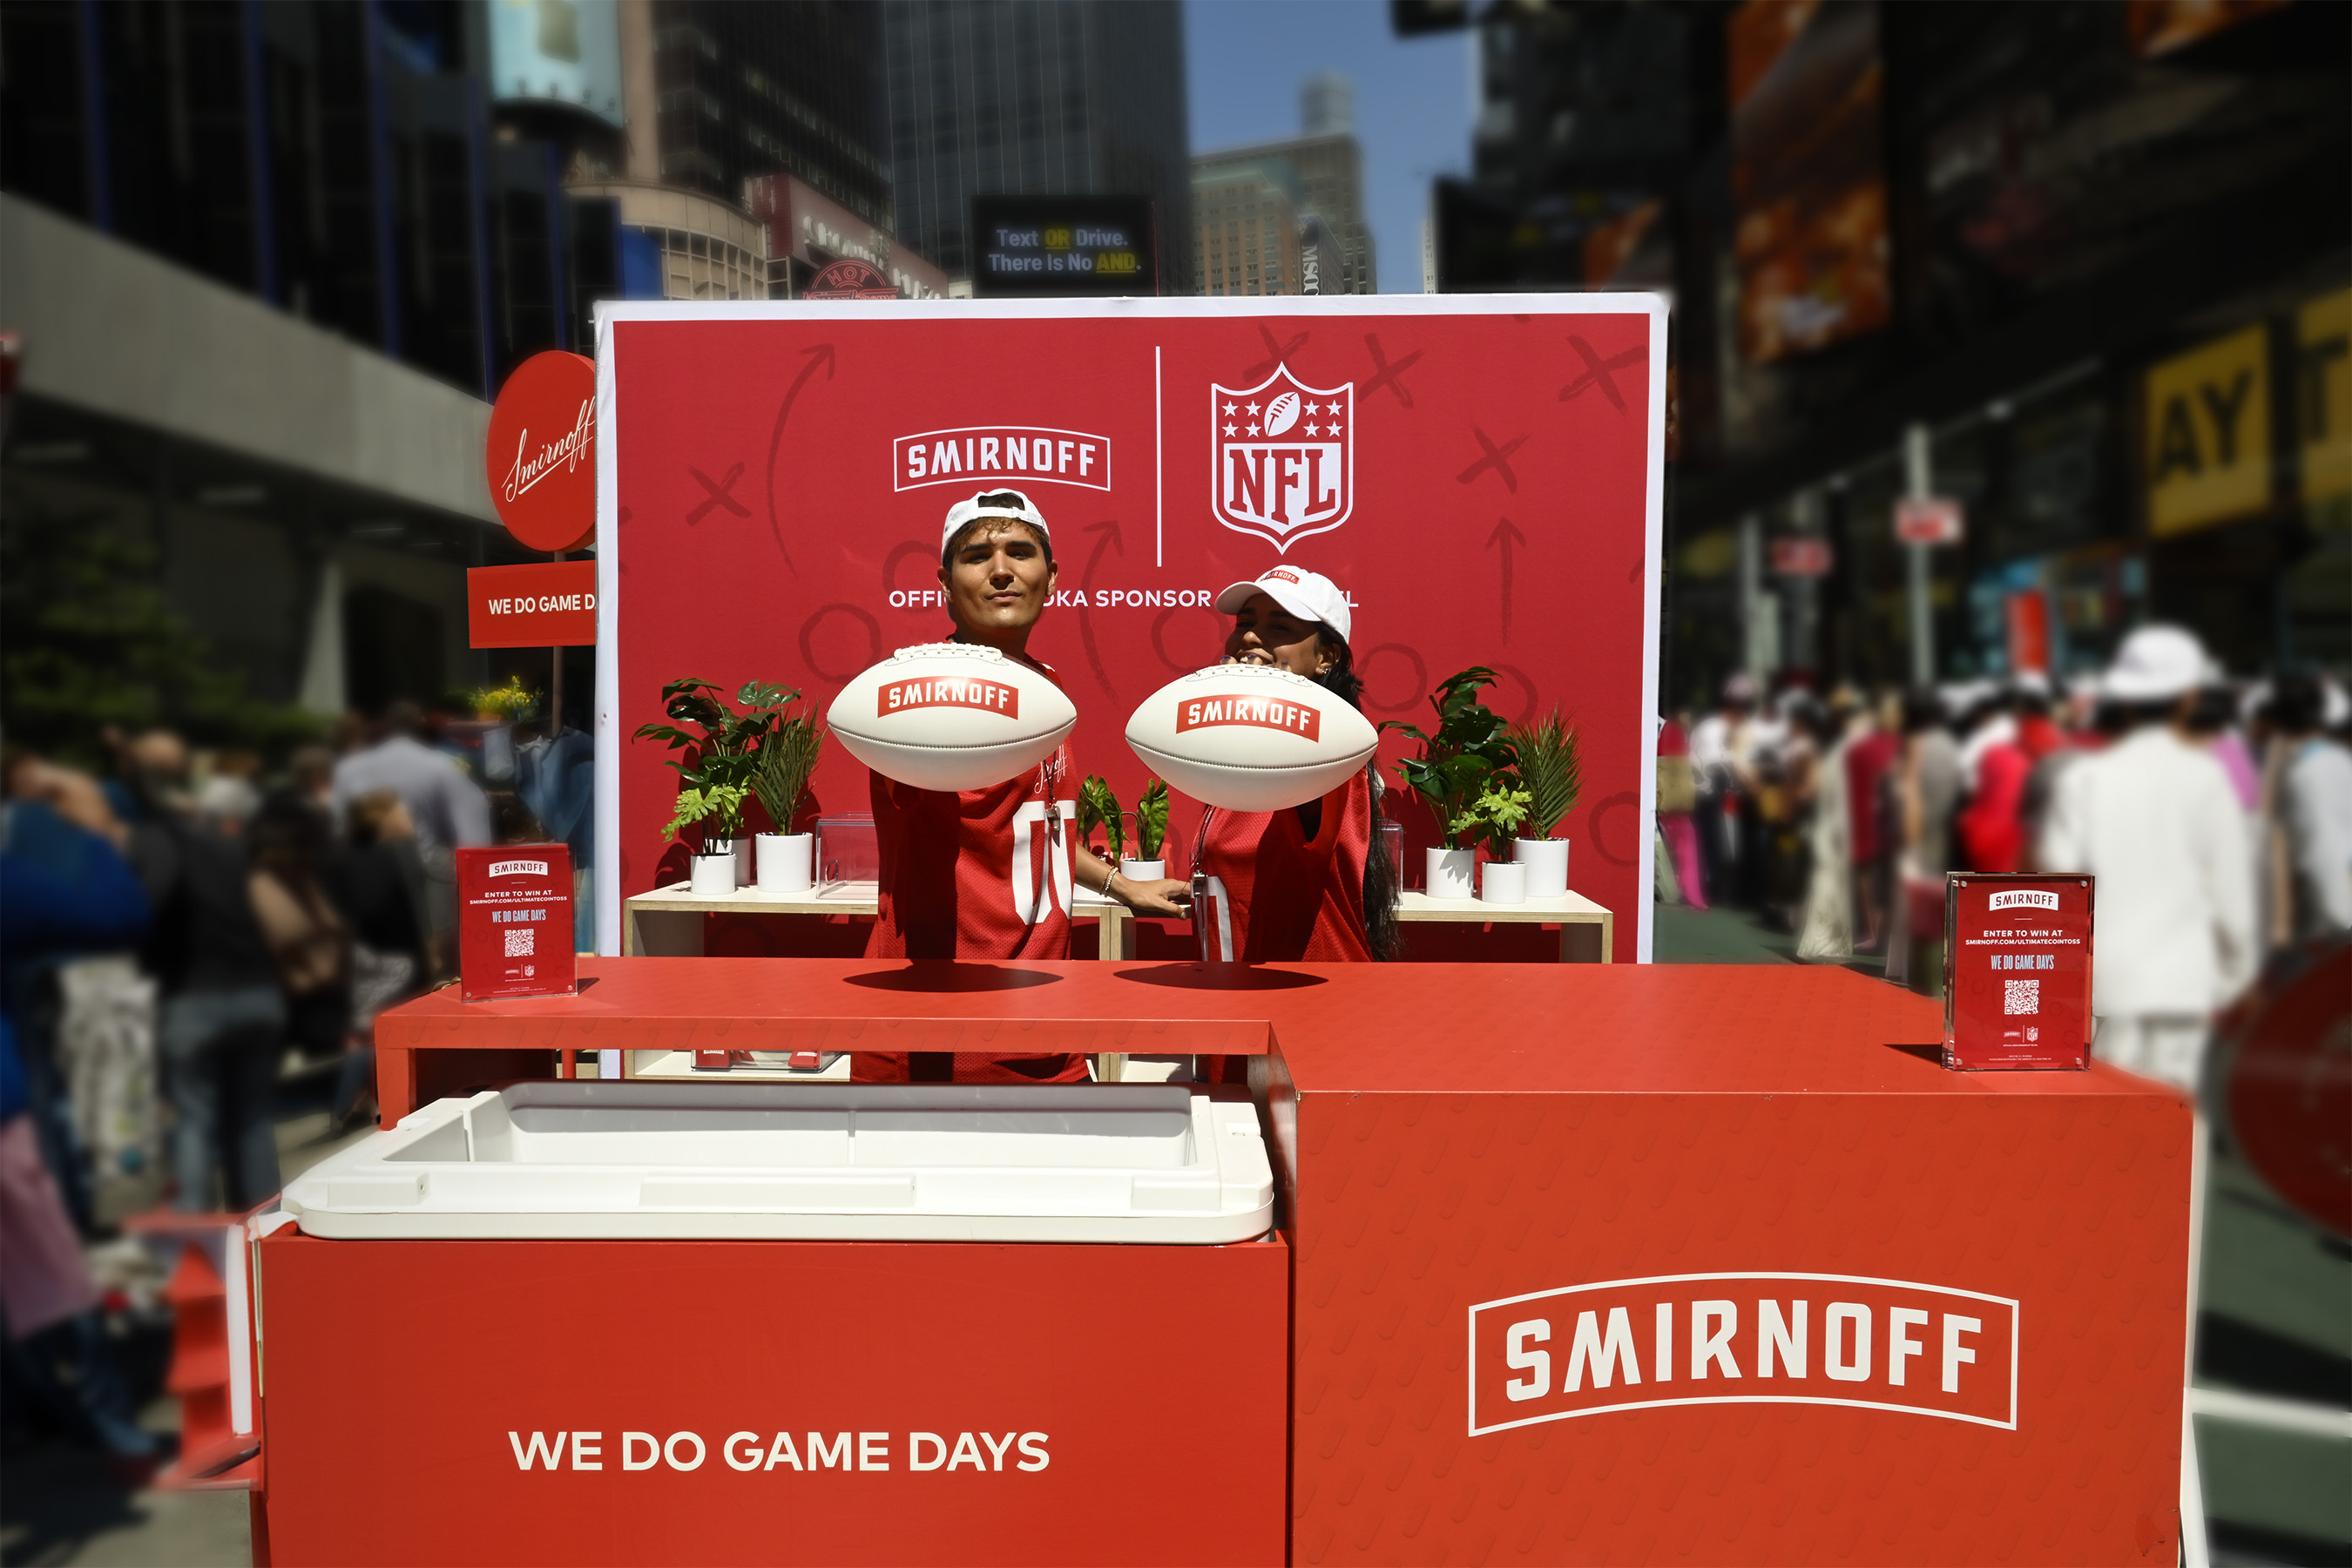 SMIRNOFF SHOWS UP BIG FOR NFL KICKOFF CELEBRATING FANS WITH NEW